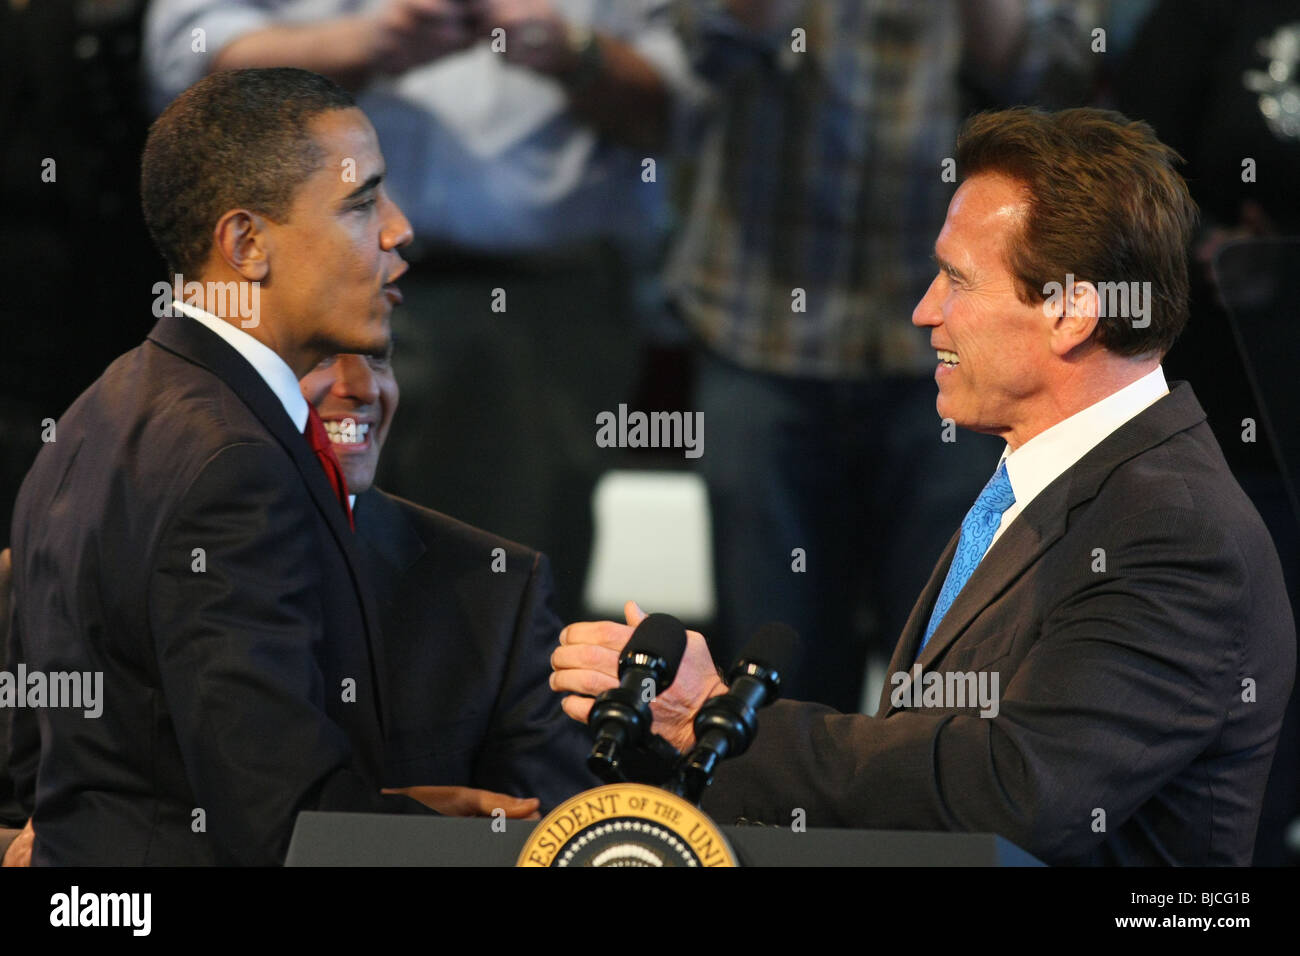 BARACK OBAMA ARNOLD SCHWARZENEGGER PRESIDENT OF U.S.A & GOVERNOR 19 March 2009 DOWNTOWN LOS ANGELES CA USA Stock Photo